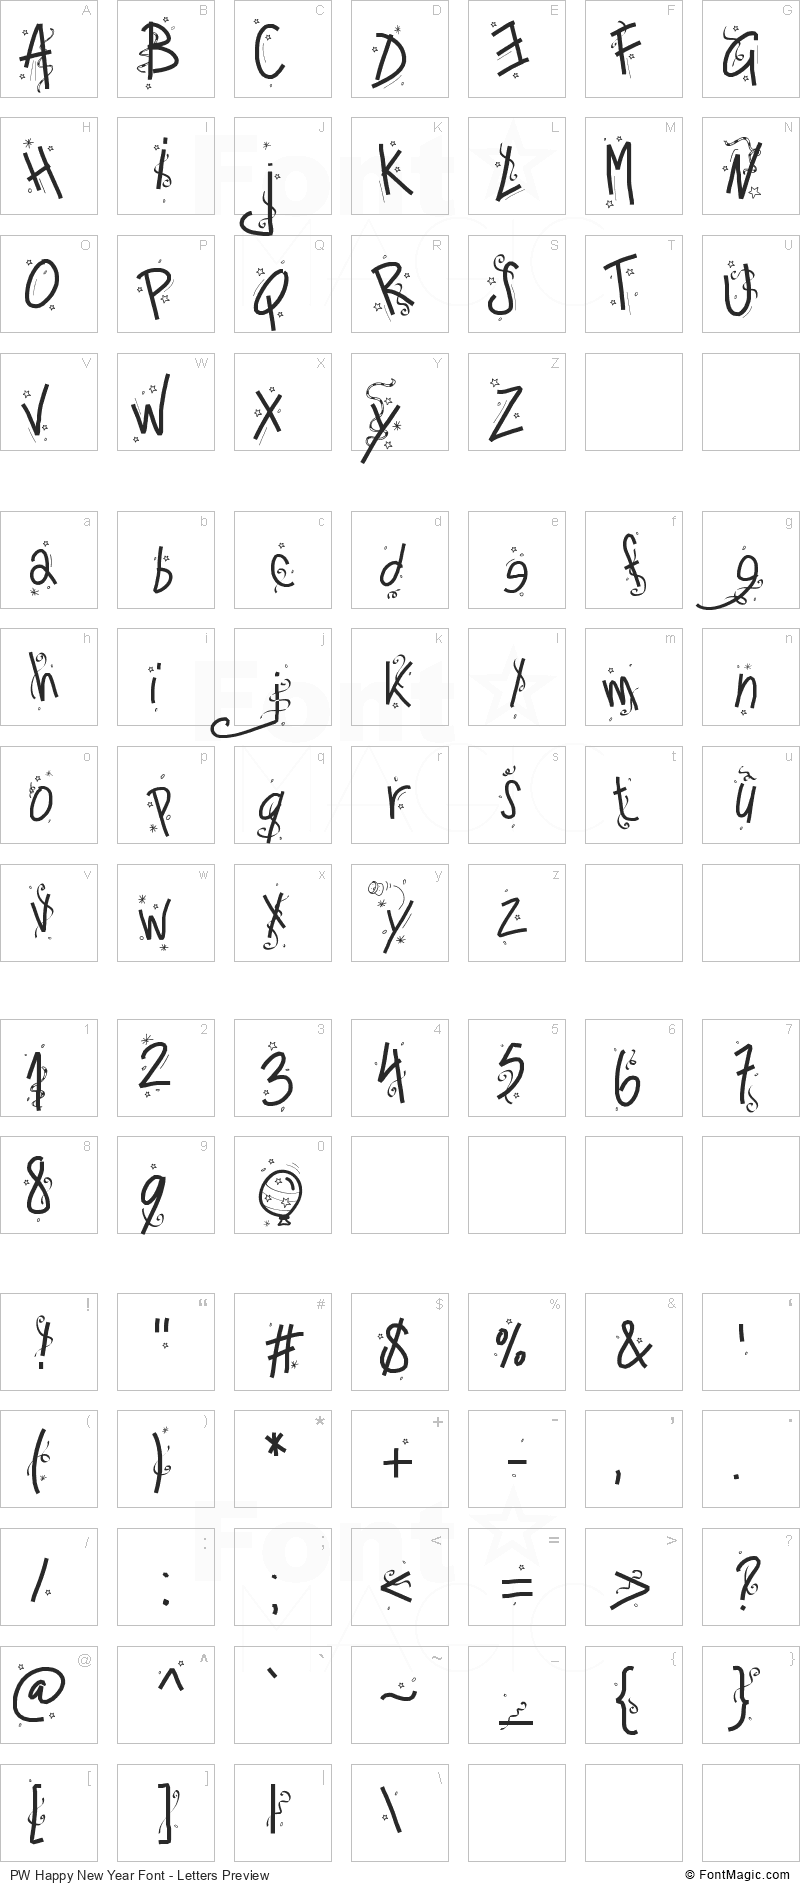 PW Happy New Year Font - All Latters Preview Chart